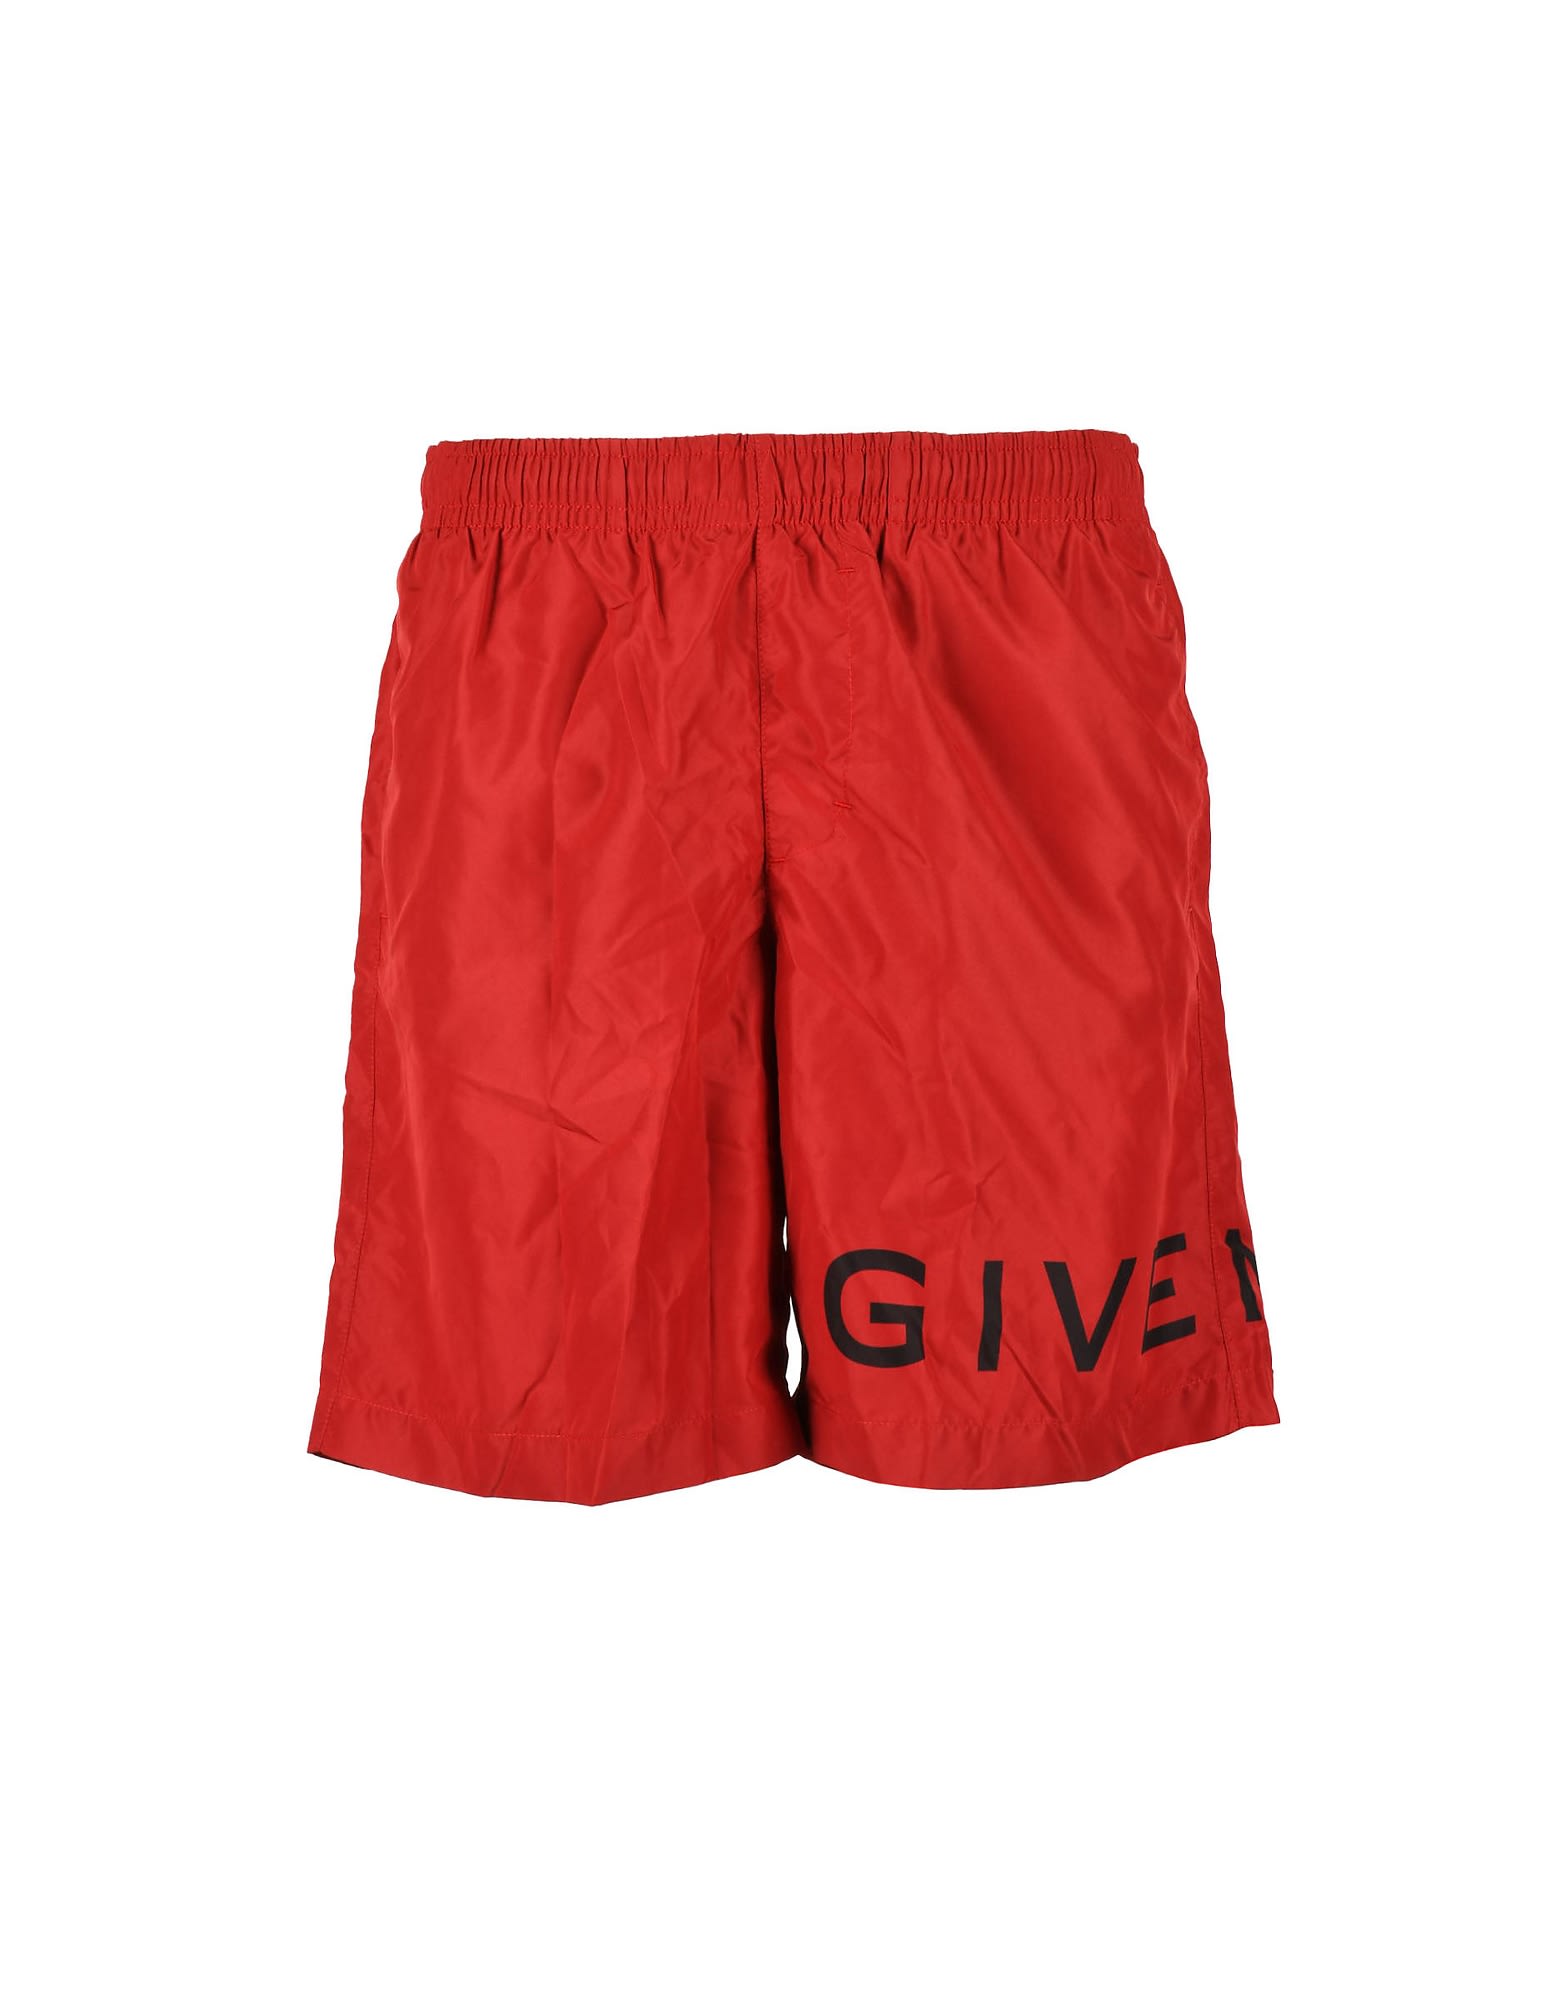 Shop Givenchy Mens Red Swimsuit